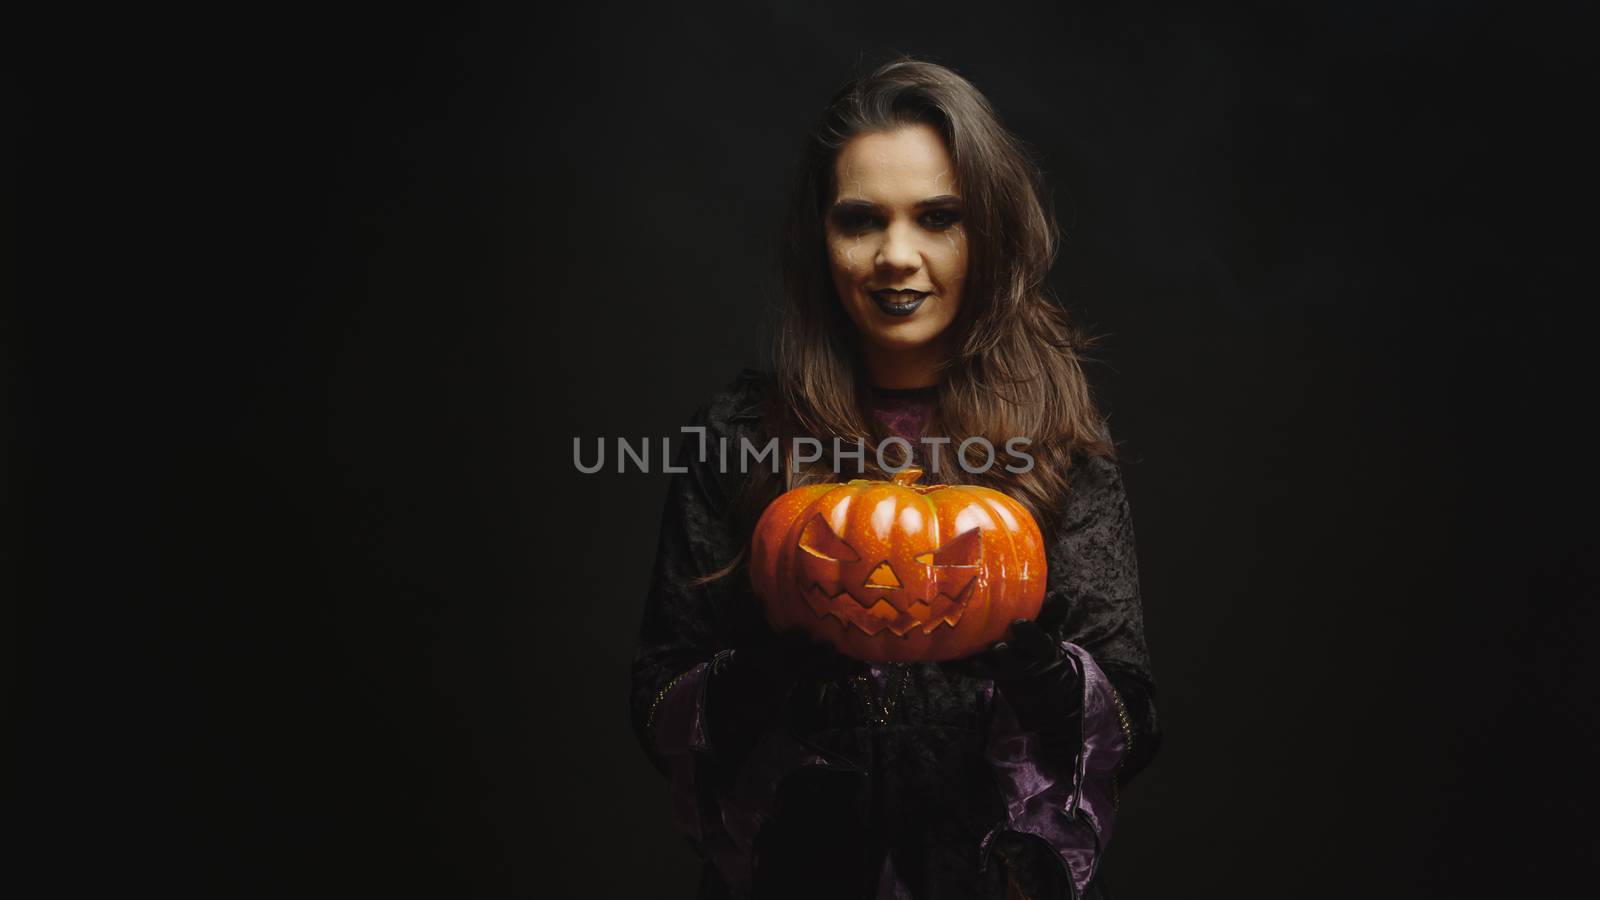 Young woman dressed up like a witch holding a pumpkin for halloween looking at the camera over a black background.